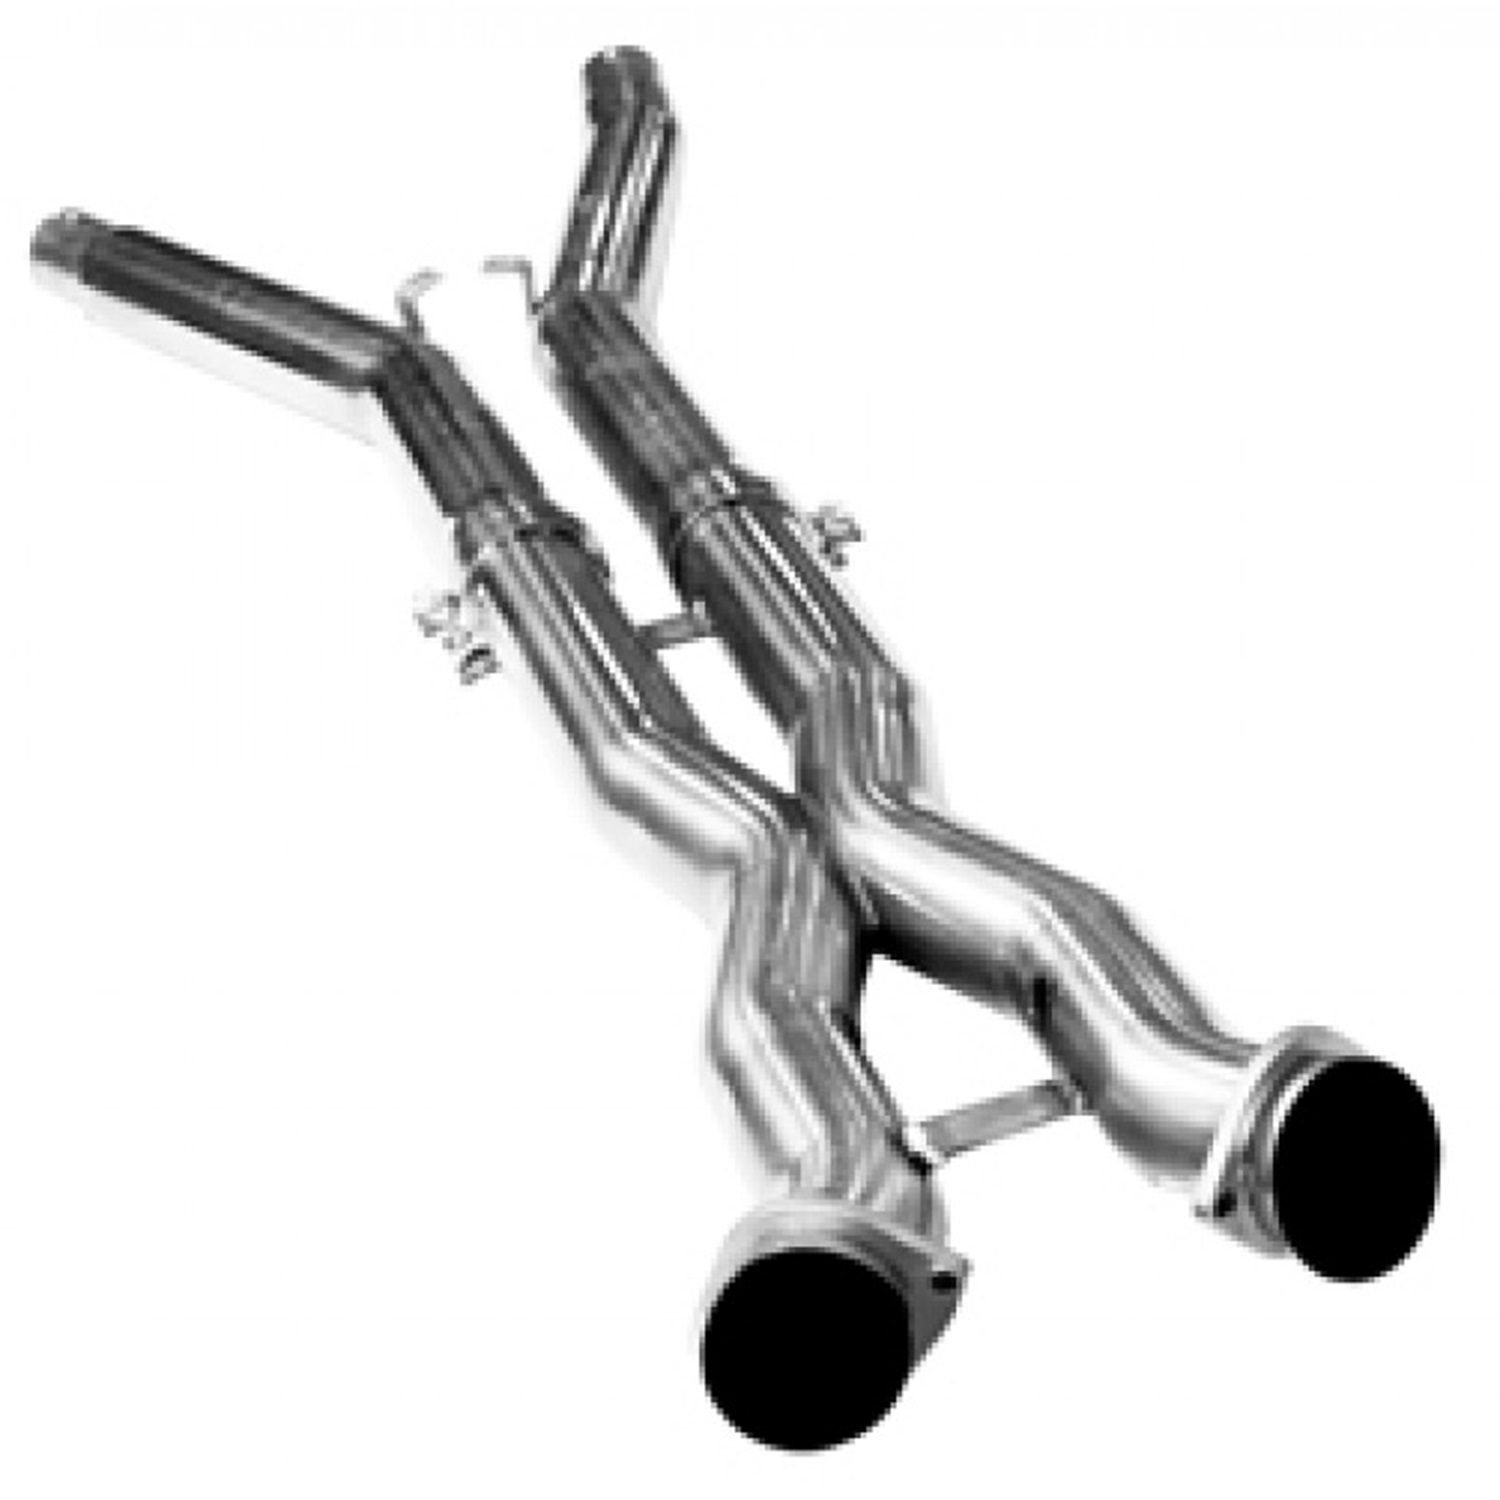 Off Road X-Pipe 3 x 3" Connects To 2.5" OEM Style Exhaust Incl. 3 x 2.5" Mid Pipes 05-08 Corvette C6 LS2/LS3 6.0L/6.2L